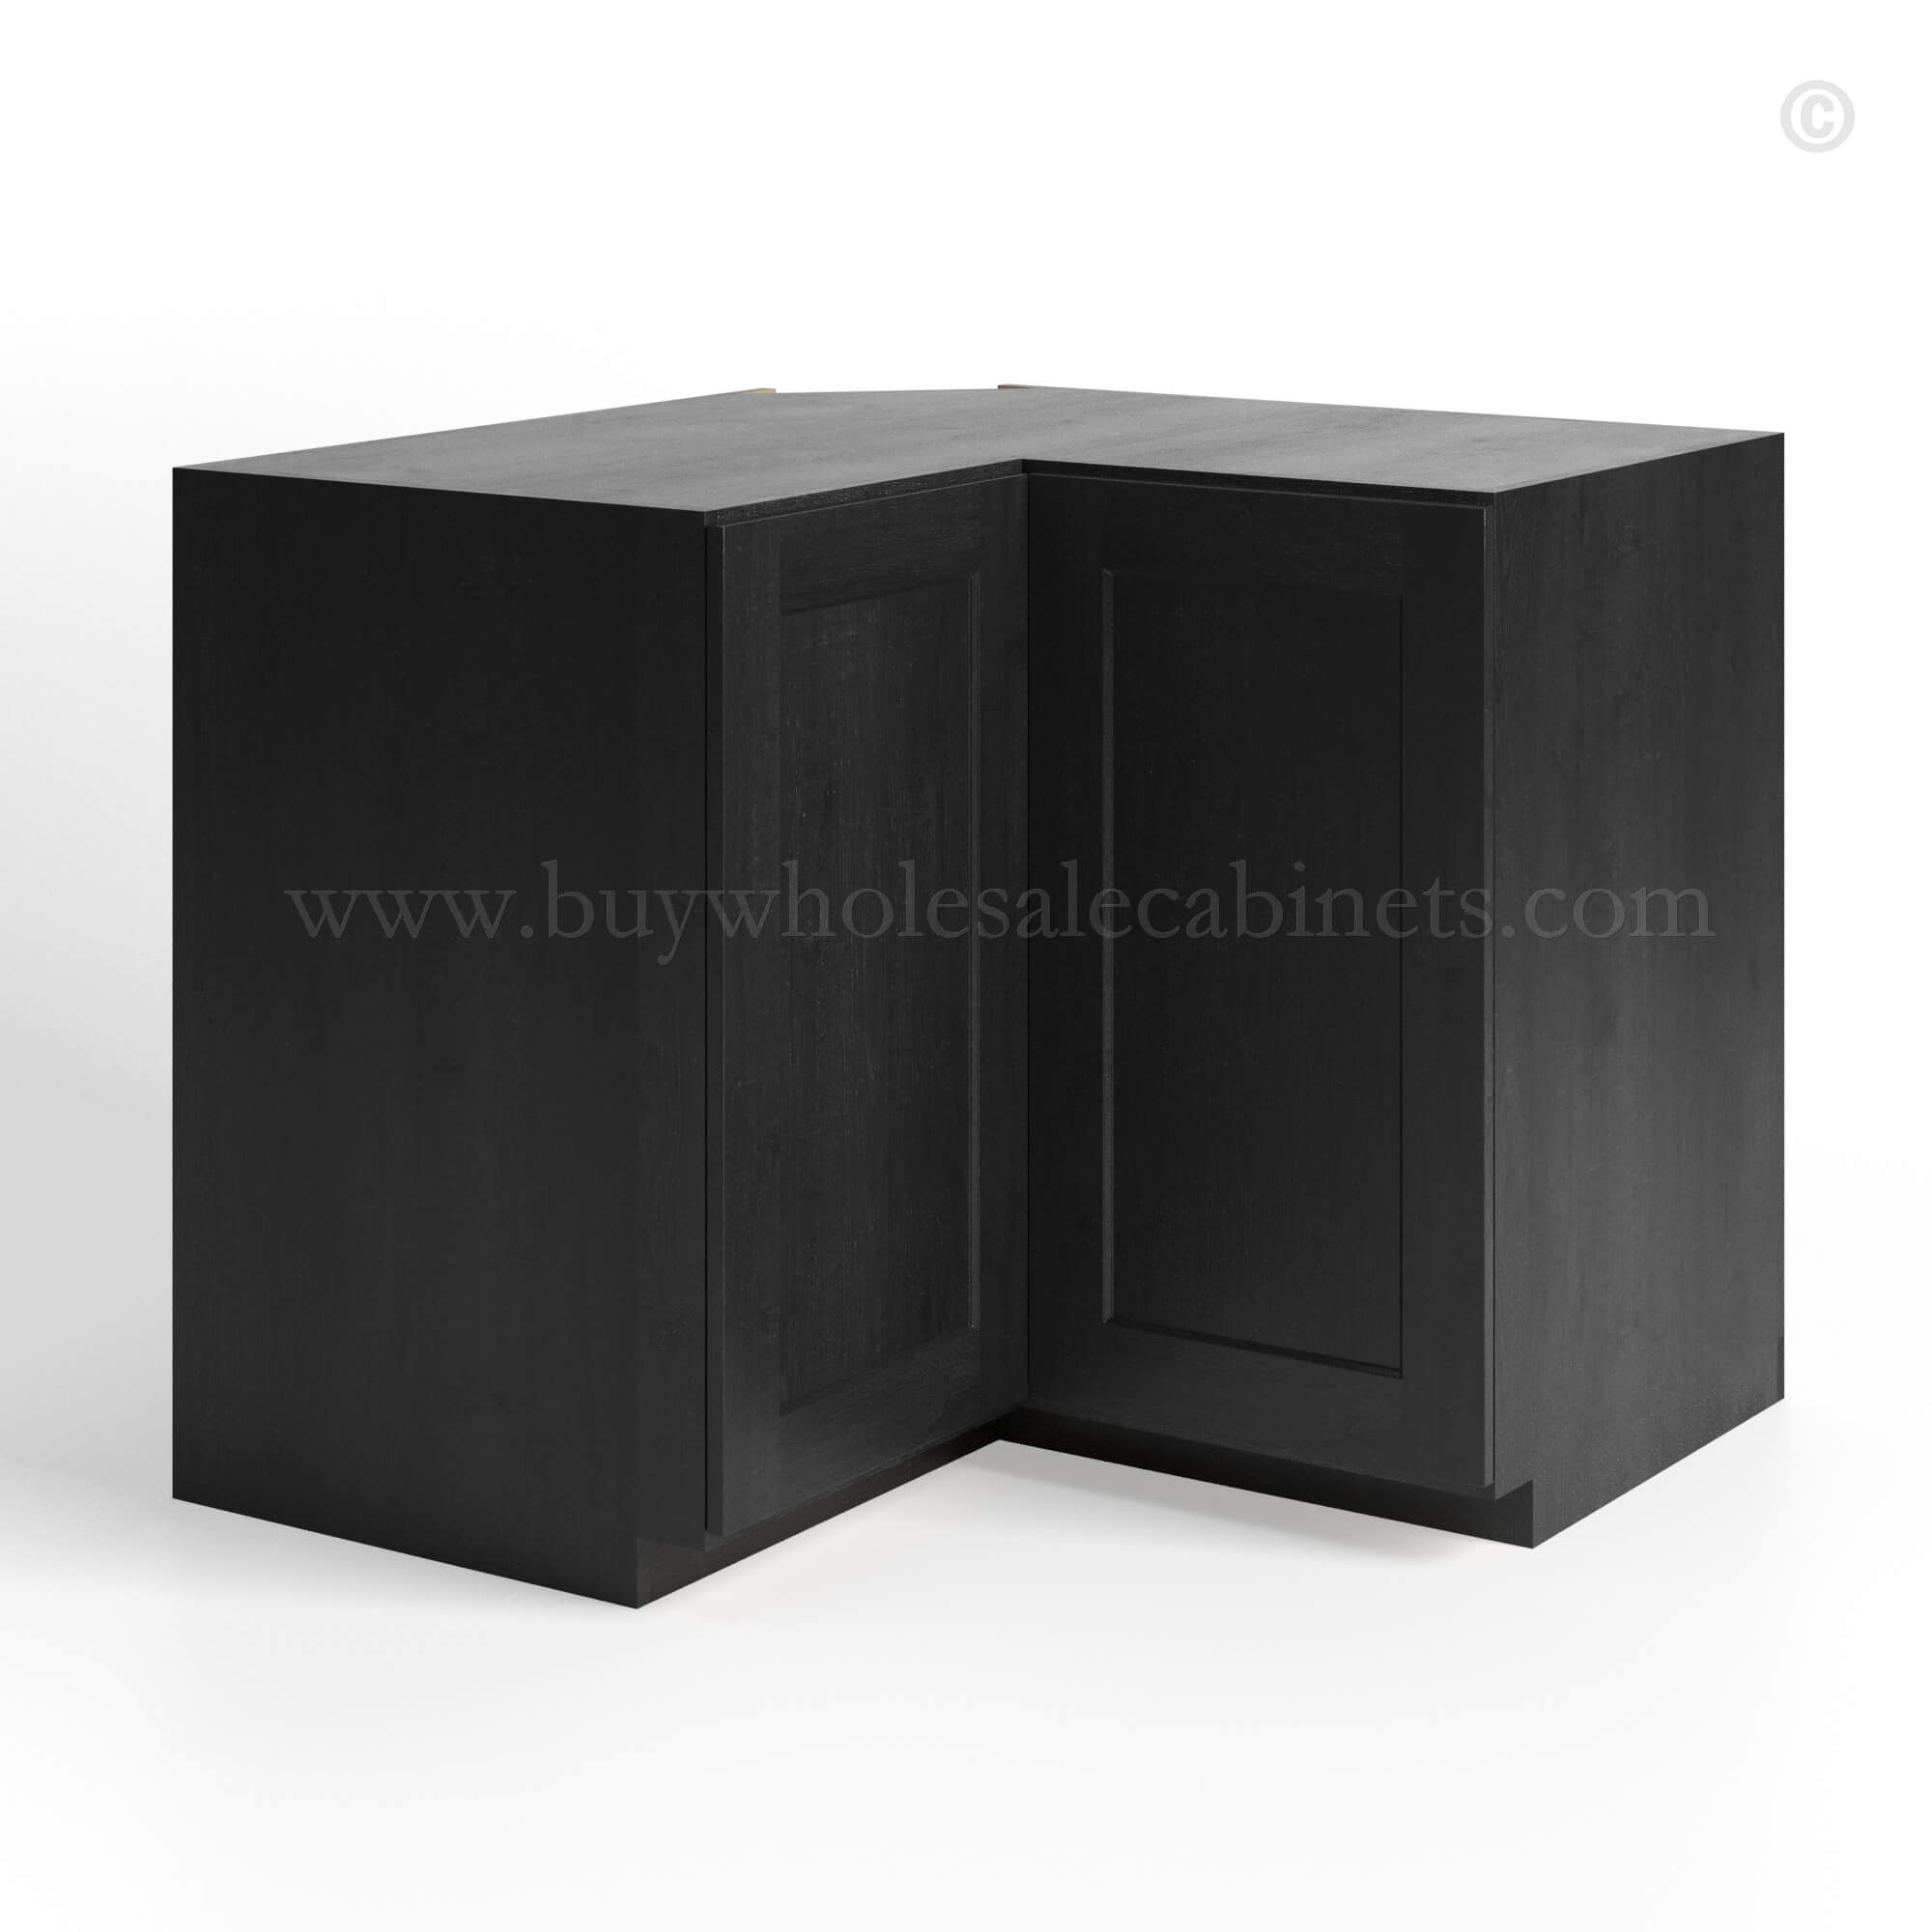 Charcoal Black Shaker Wall Easy Reach Cabinet, rta cabinets, wholesale cabinets